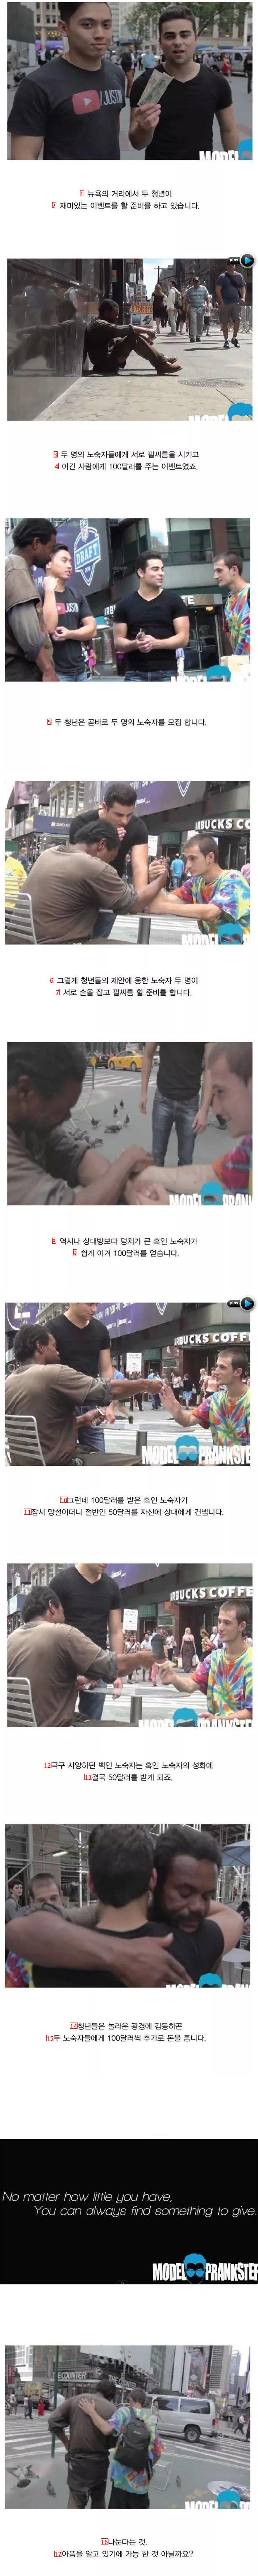 YouTuber who arm wrestled homeless people and gave $100 to the winner